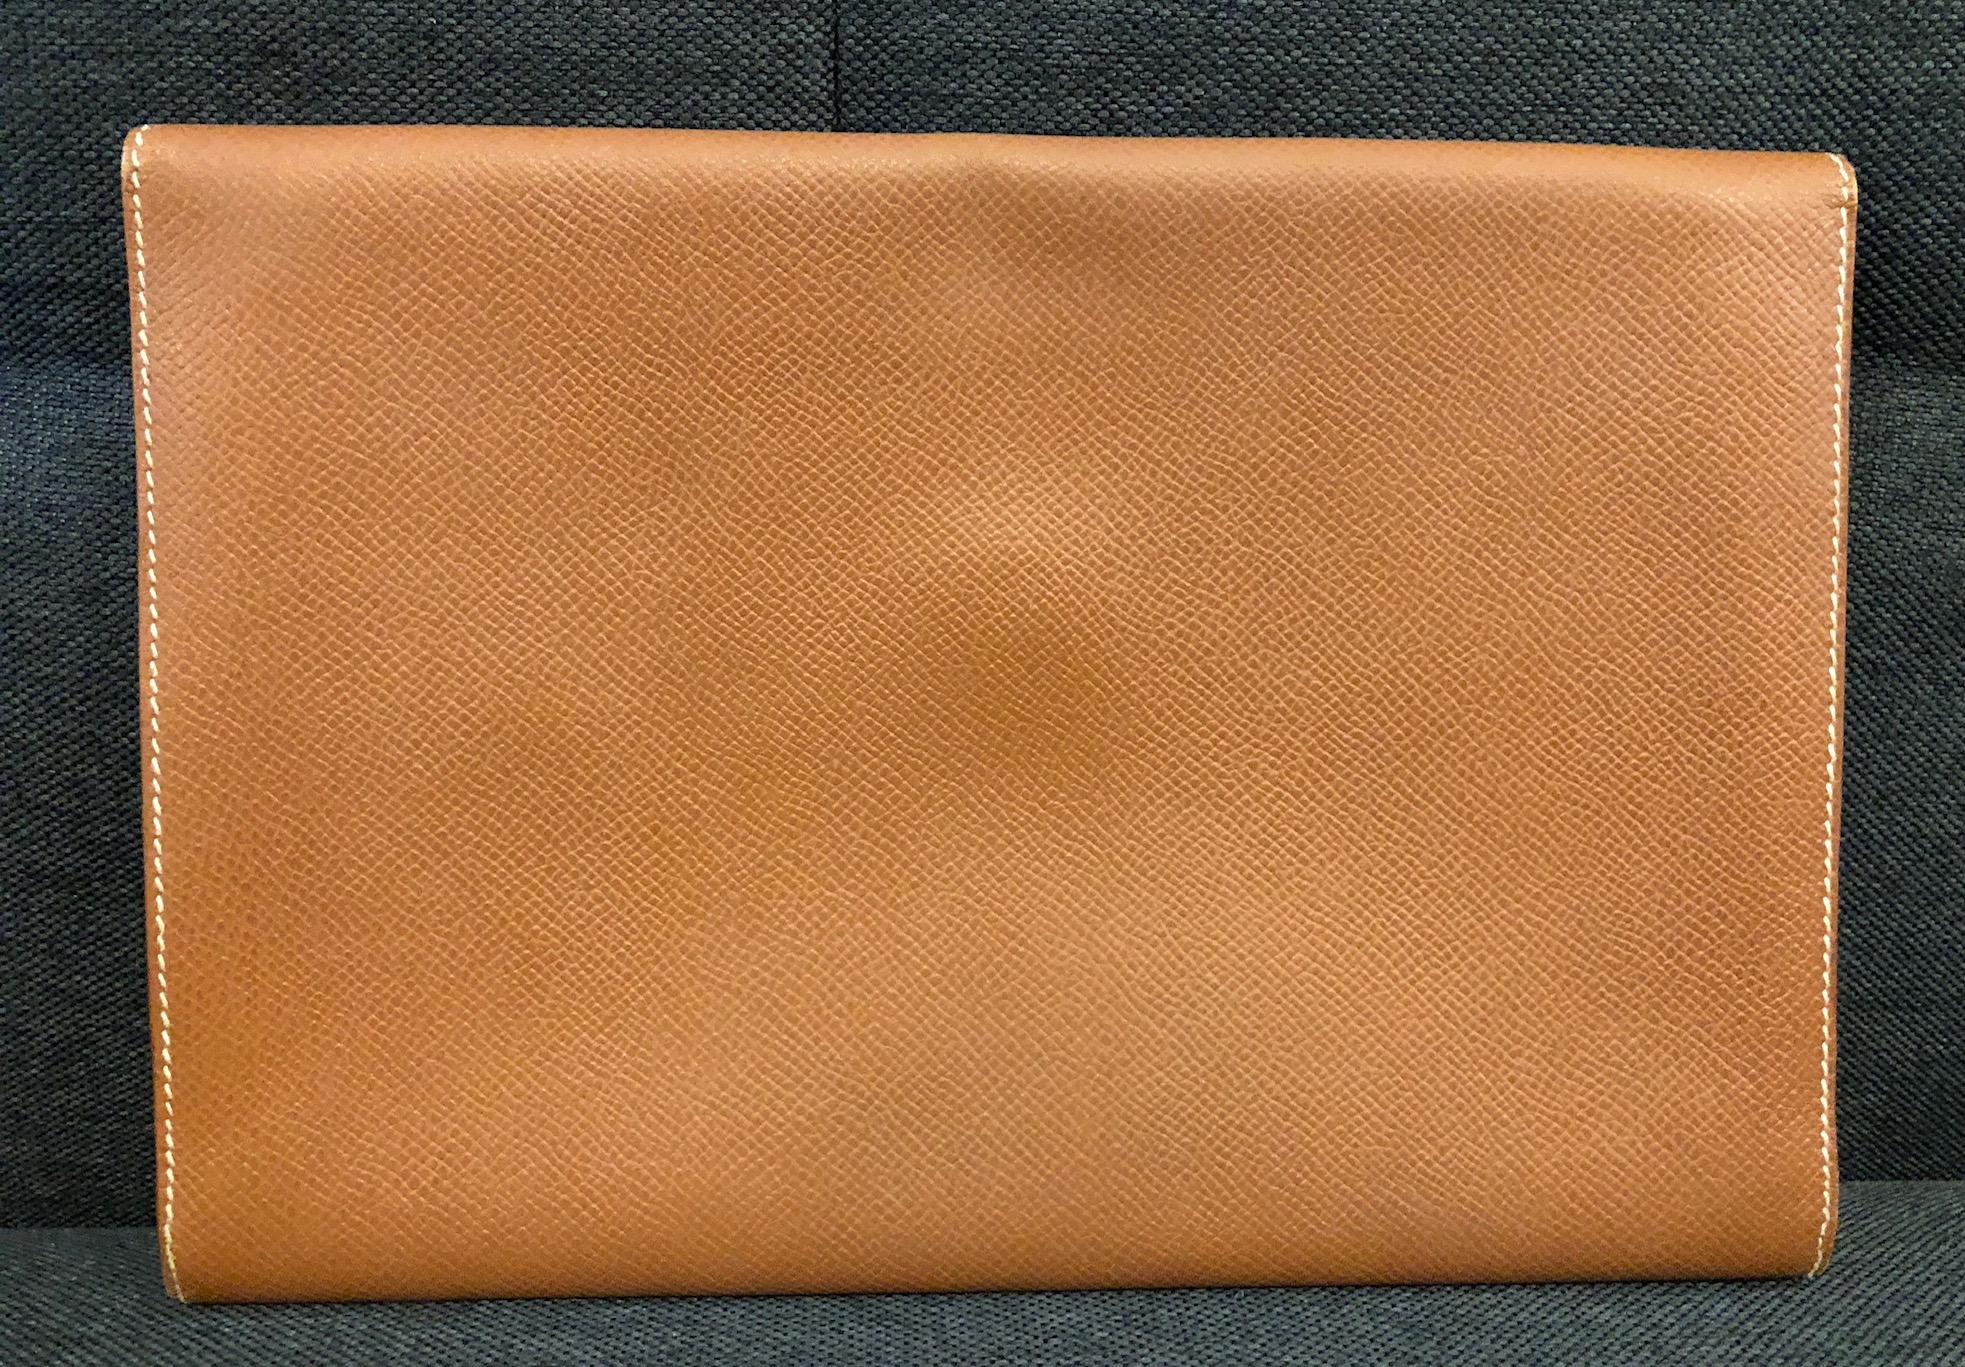 HERMES Clutch Limited Edition Clemence Leather - Chelsea Vintage Couture